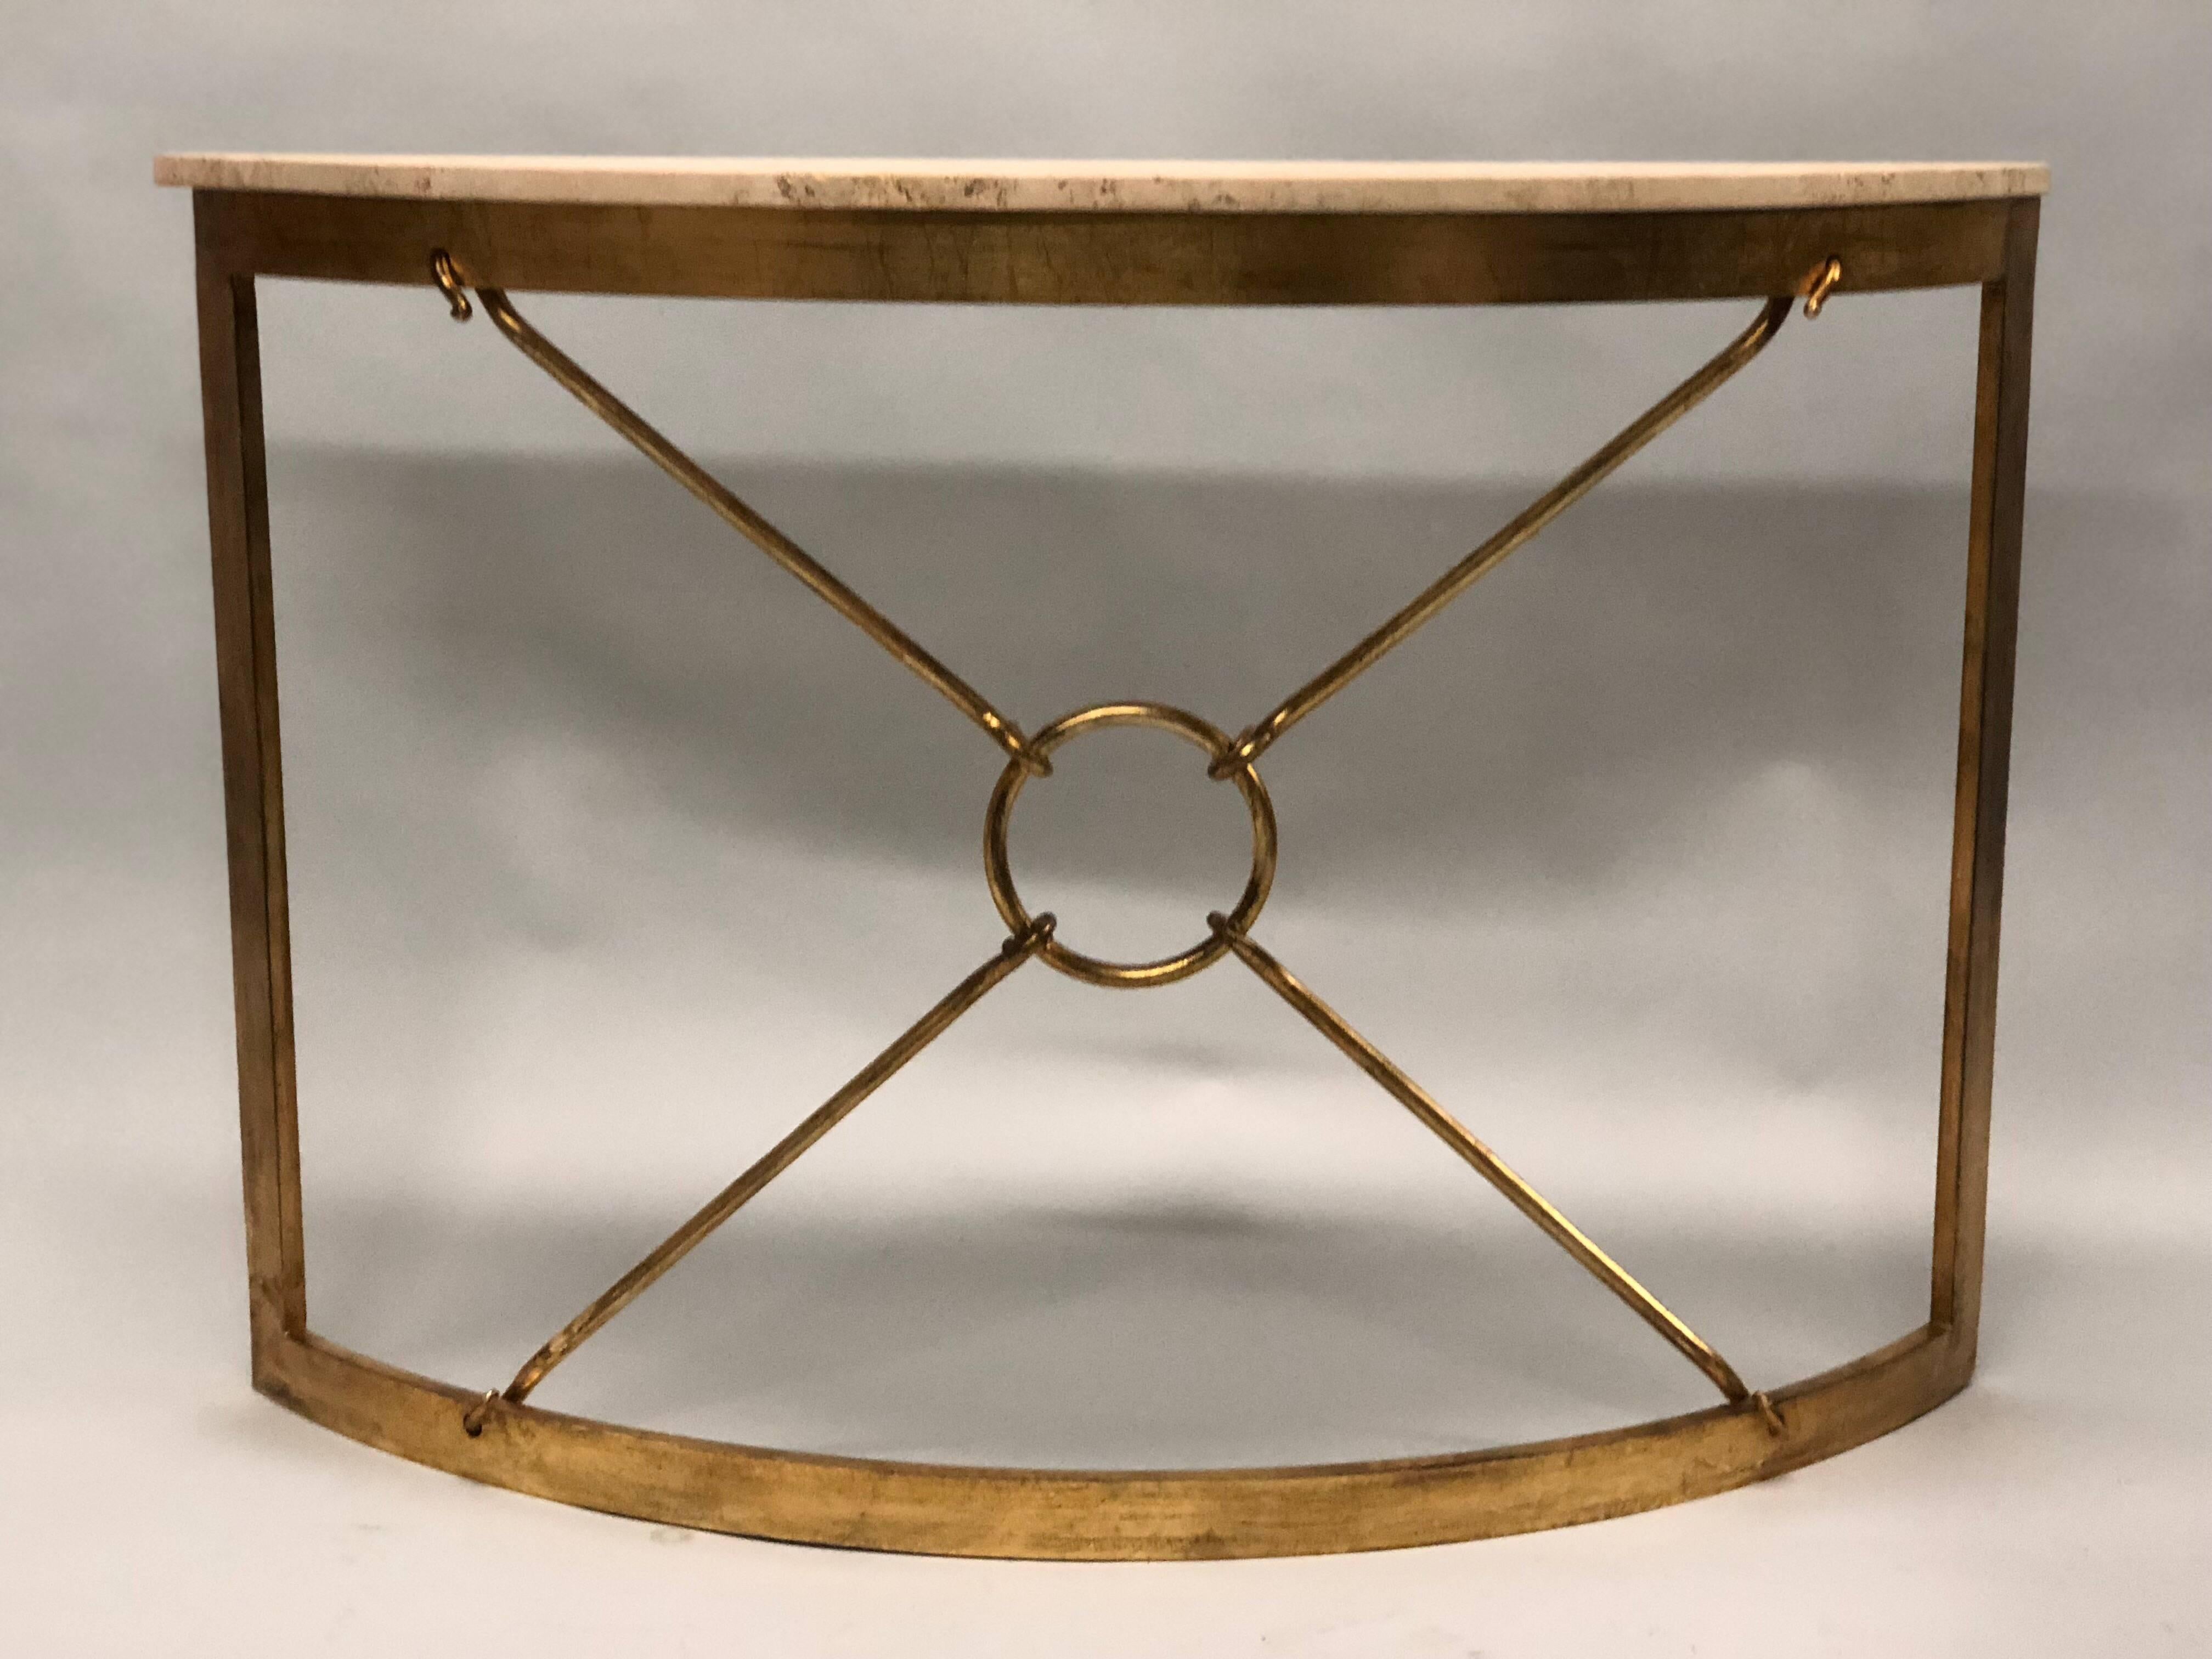 2 Italian Modern Neoclassical Gilt Iron Demi-lune Console by Gio Banci & Hermes In Good Condition For Sale In New York, NY